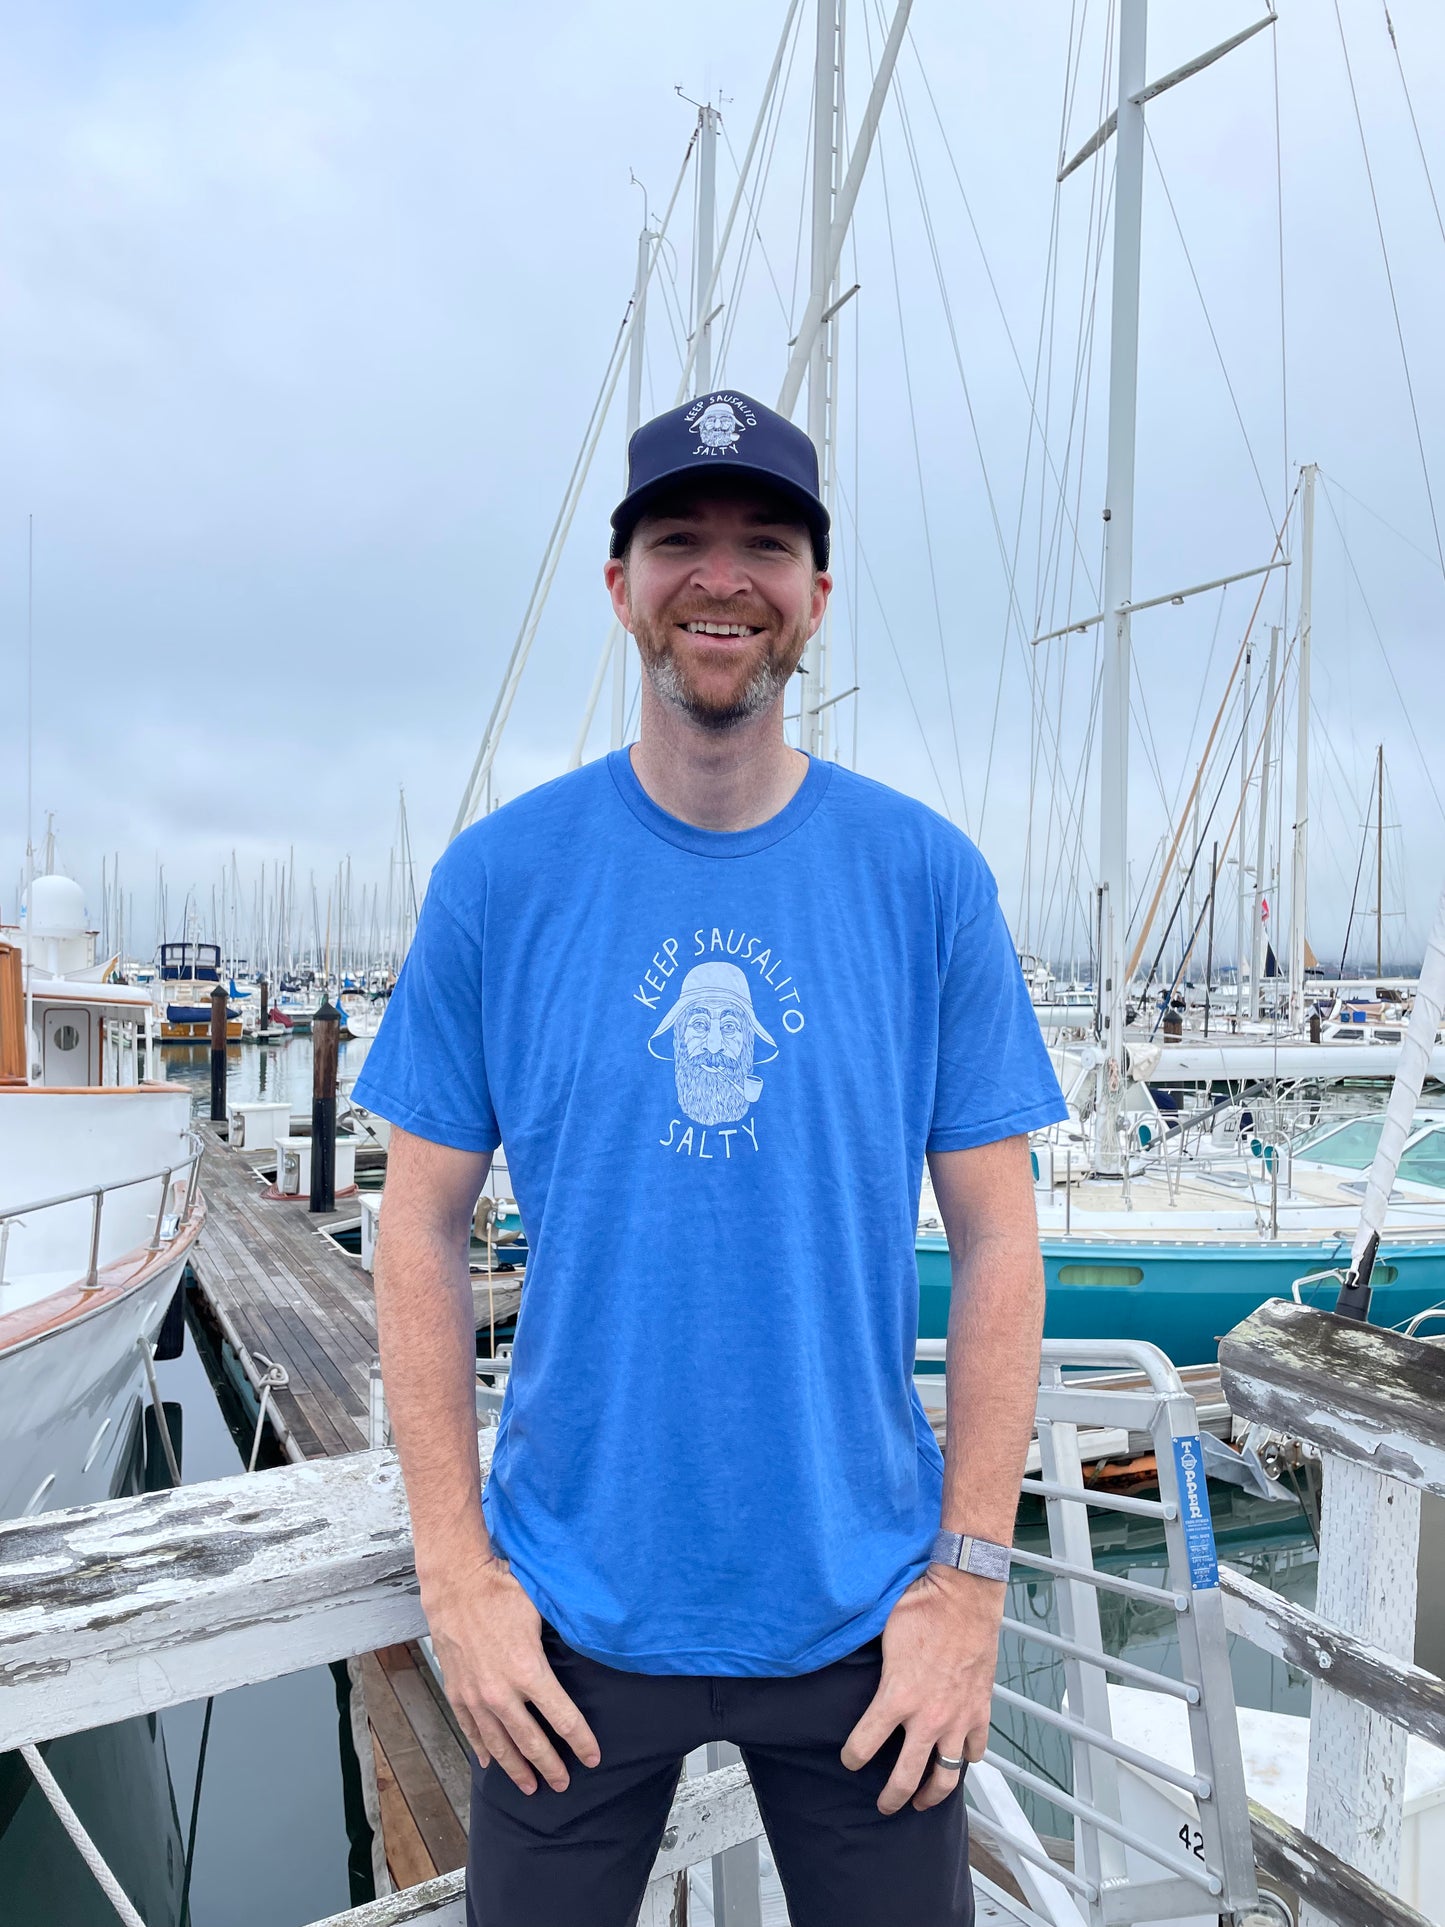 Keep Sausalito Salty: Unisex T-Shirt available in 3 colors